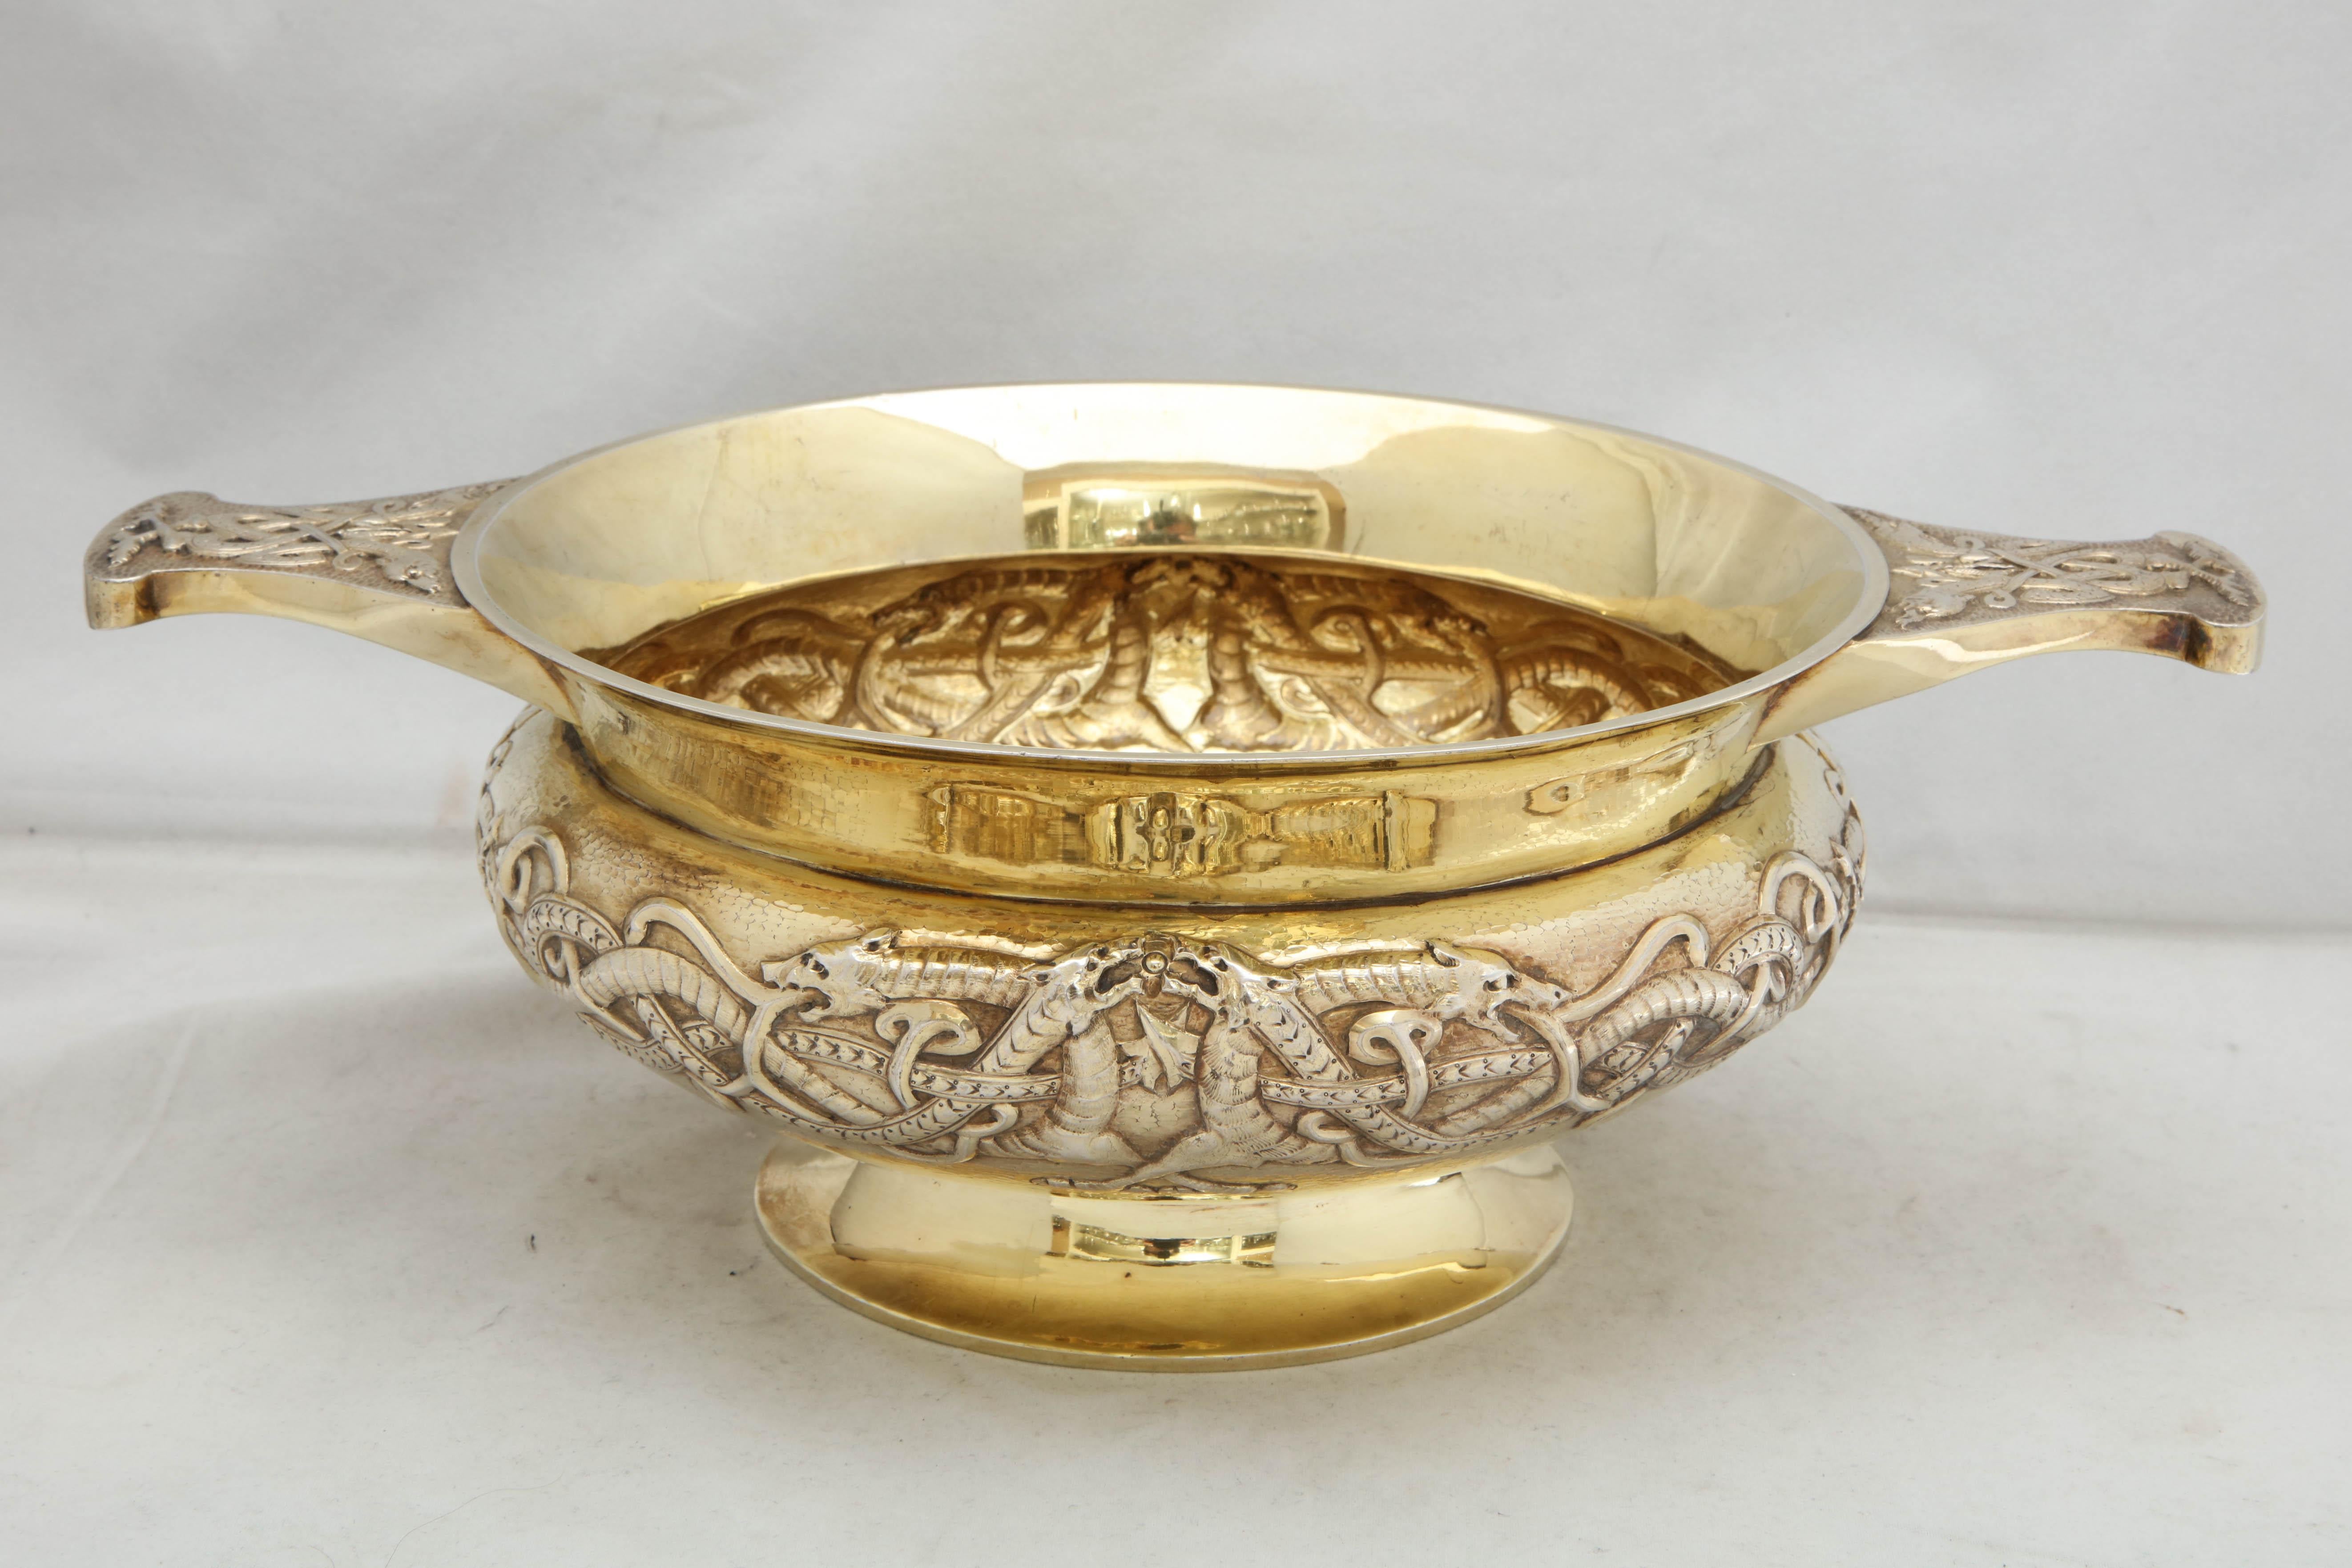 Edwardian period, sterling silver-gilt, Celtic style, two-handled centerpiece bowl, London, 1910, Philip Hanson Abbot - maker. Chased with Celtic designs. Gilded. outside of bowl is lightly hammered. Measures 13 3/4 inches handle to handle x 9 1/2